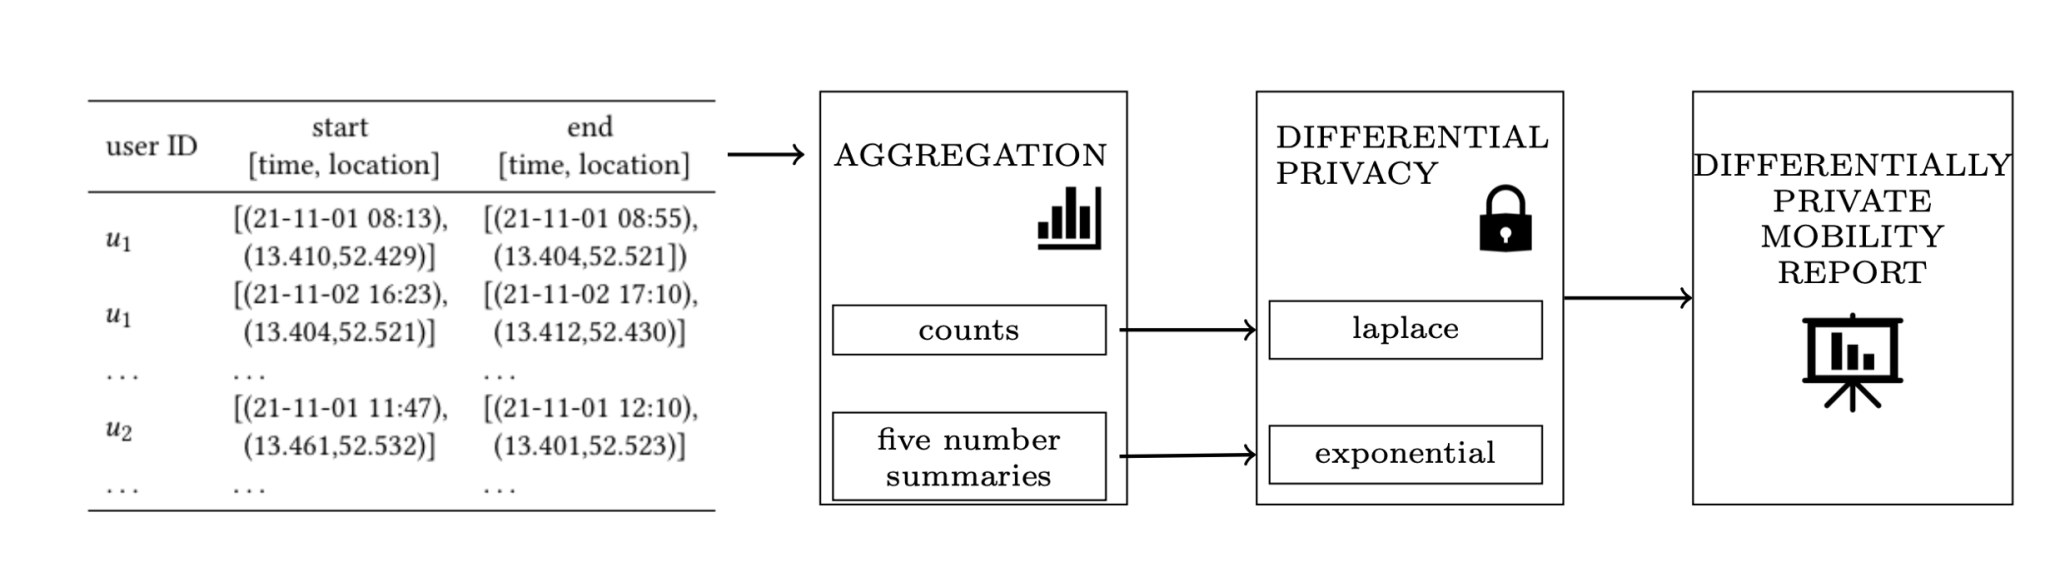 Figure 2: High level scheme of the creation of a DP Mobility Report